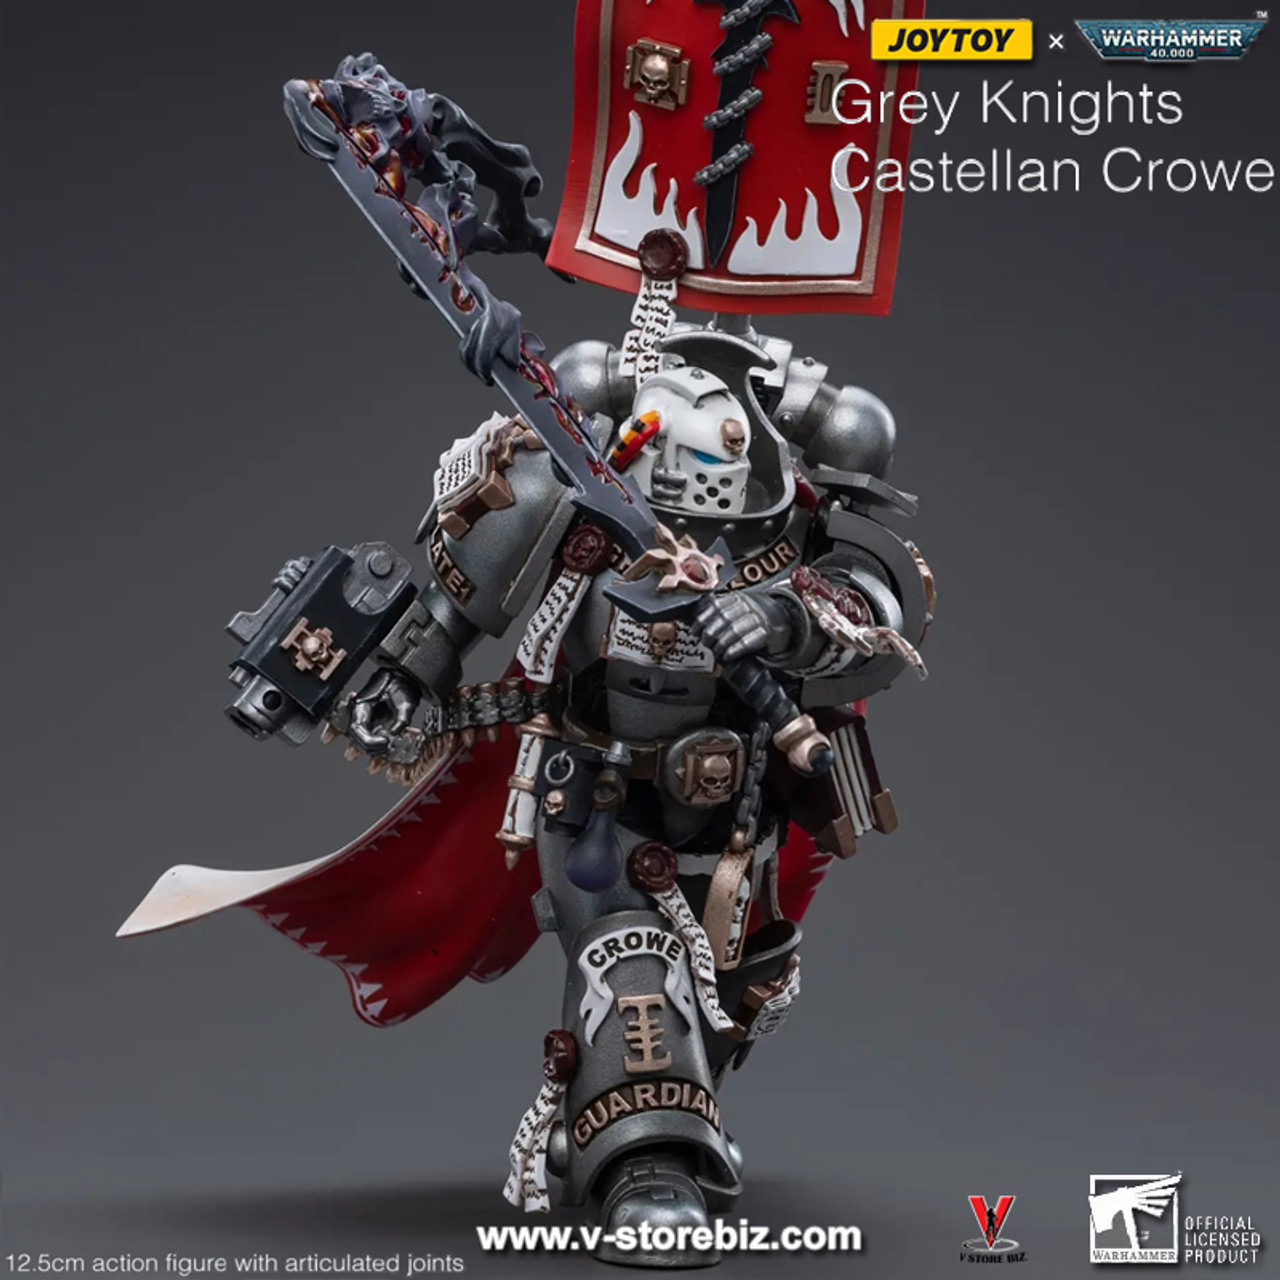 New JOYTOY Castellan Crowe & Space Marines!New JOYTOY action figures have  been spotted, including Grey Knights Castellan C…